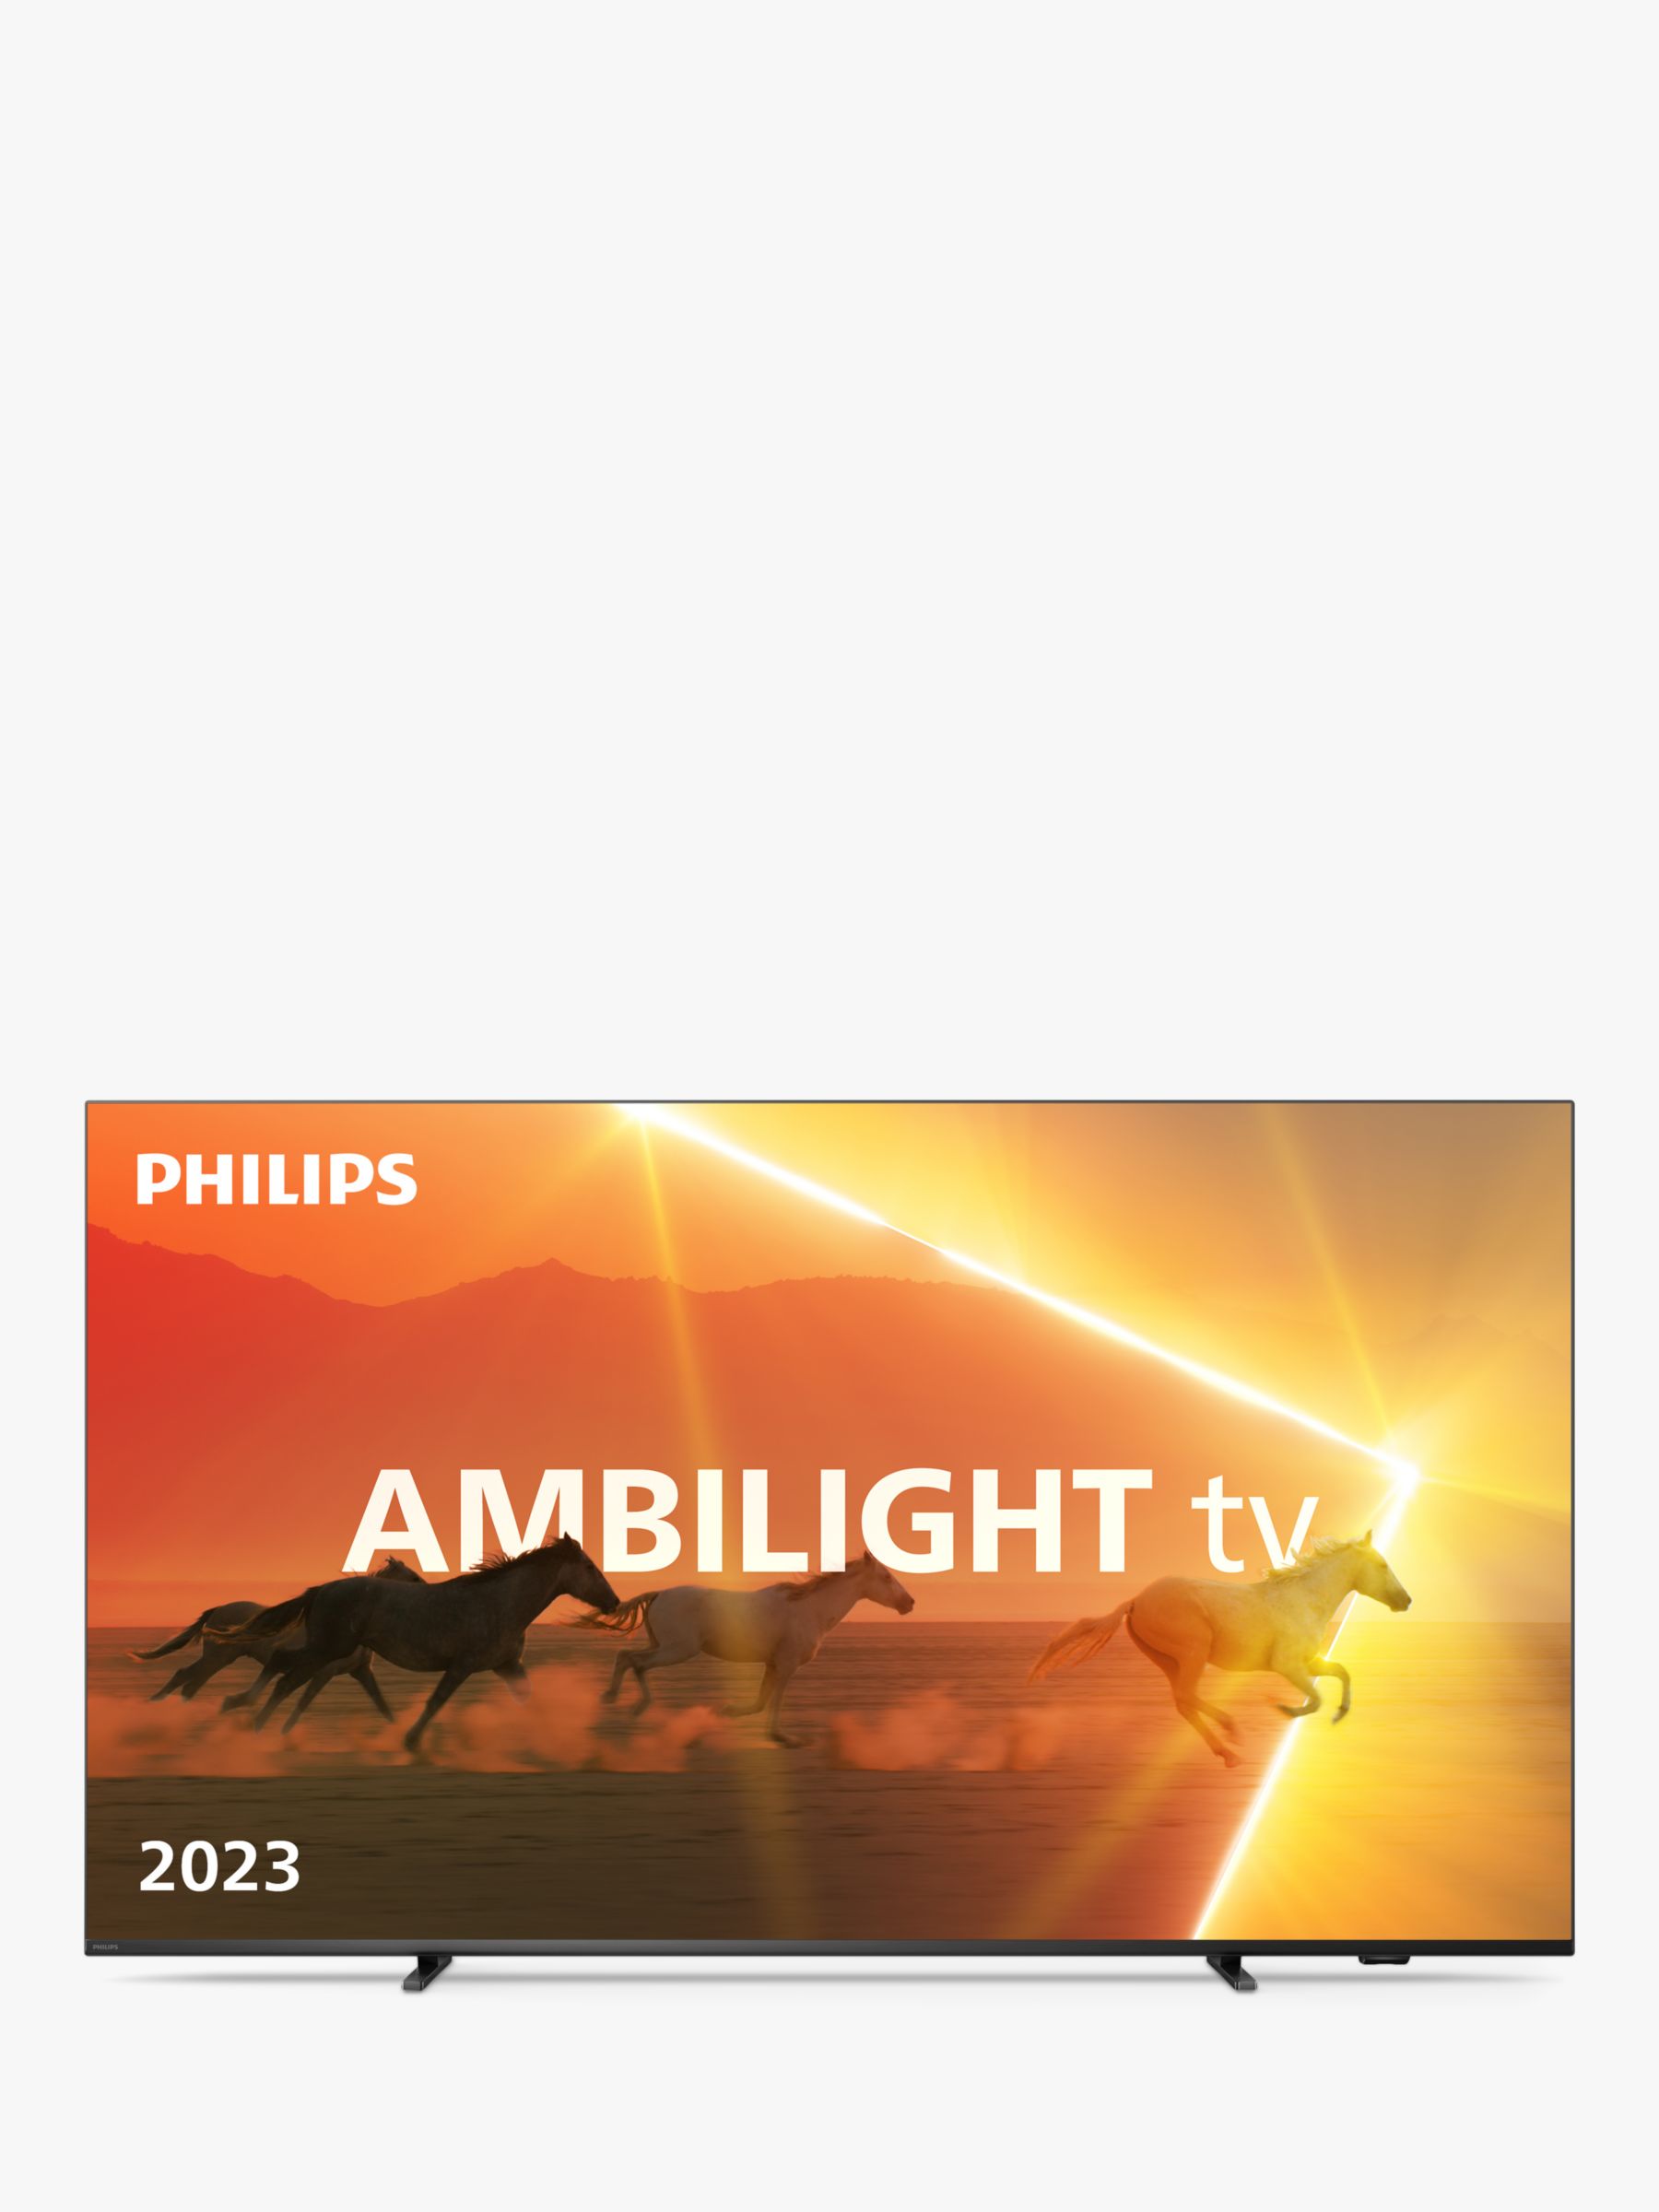 Philips 65PML9008 The Xtra (2023) MiniLED HDR 4K Ultra HD Smart TV, 65 inch with Freeview Play, Ambilight & Dolby Atmos, Anthracite Grey